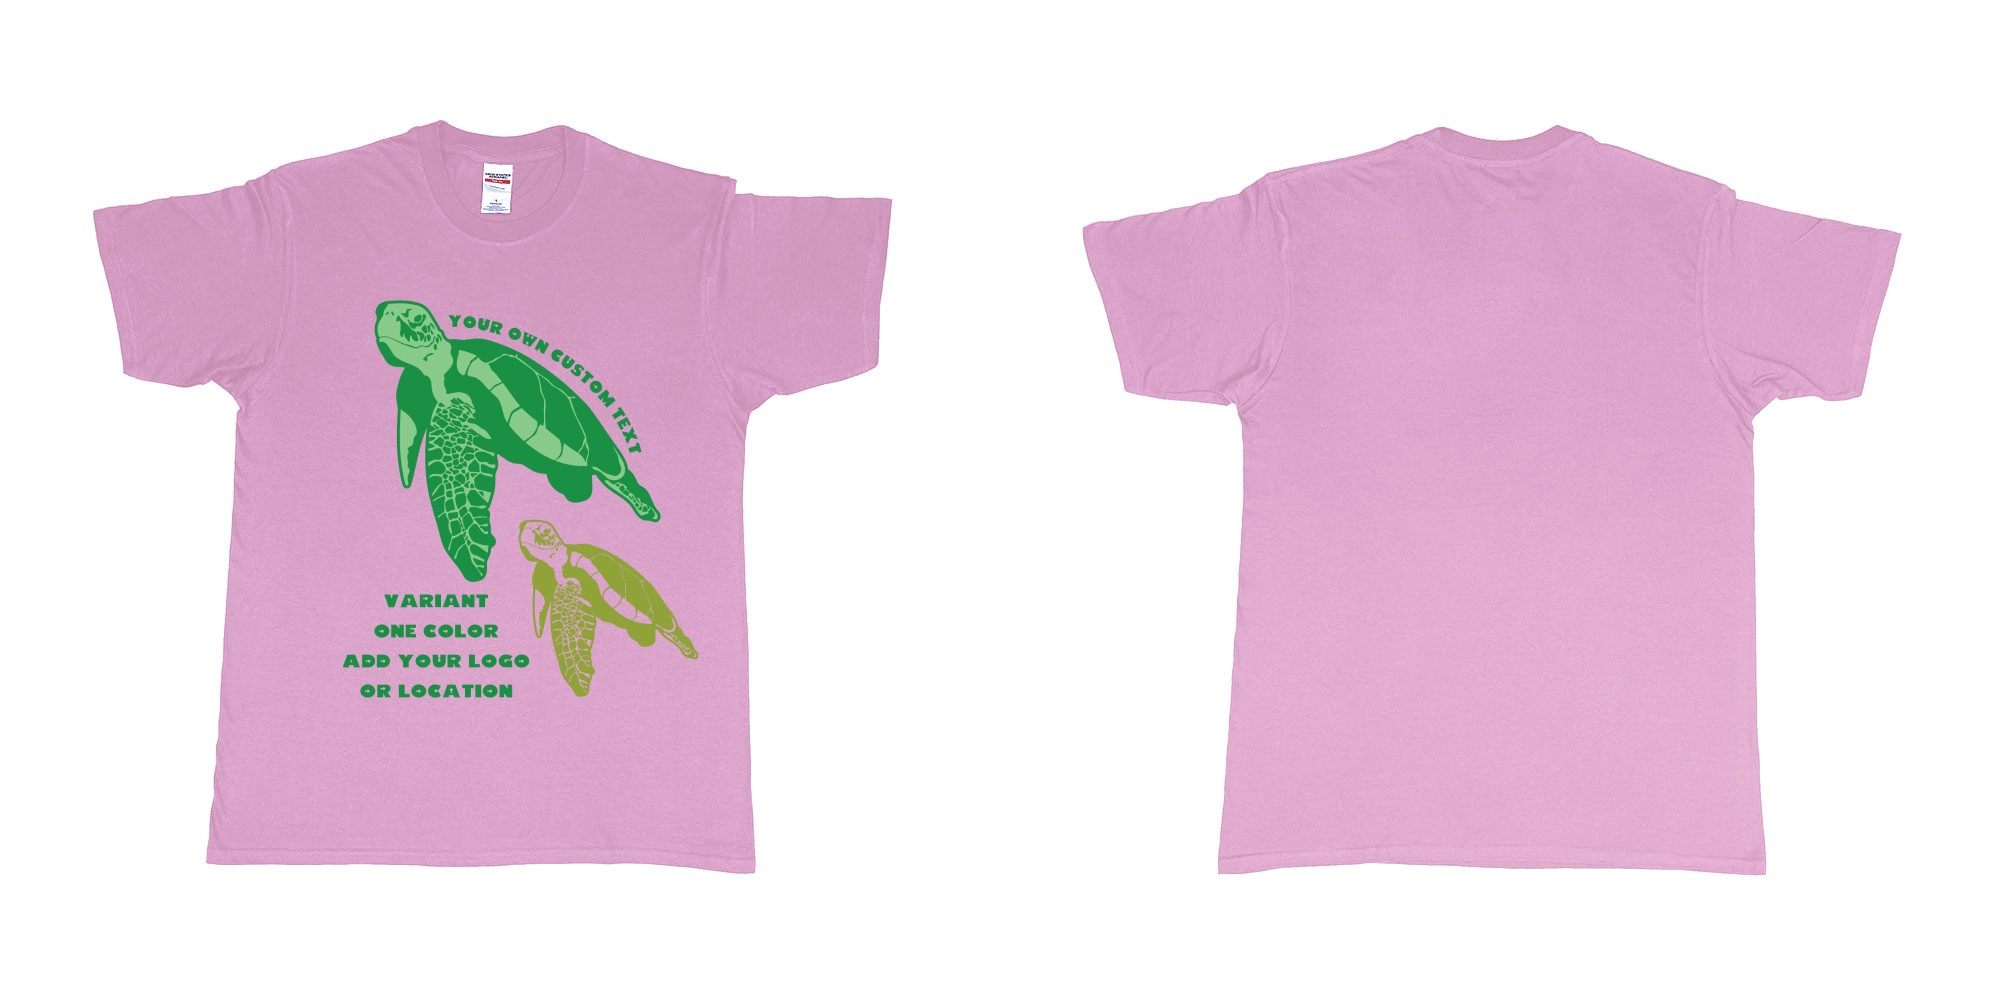 Custom tshirt design hawksbill green sea turtle chilling add logo in fabric color light-pink choice your own text made in Bali by The Pirate Way